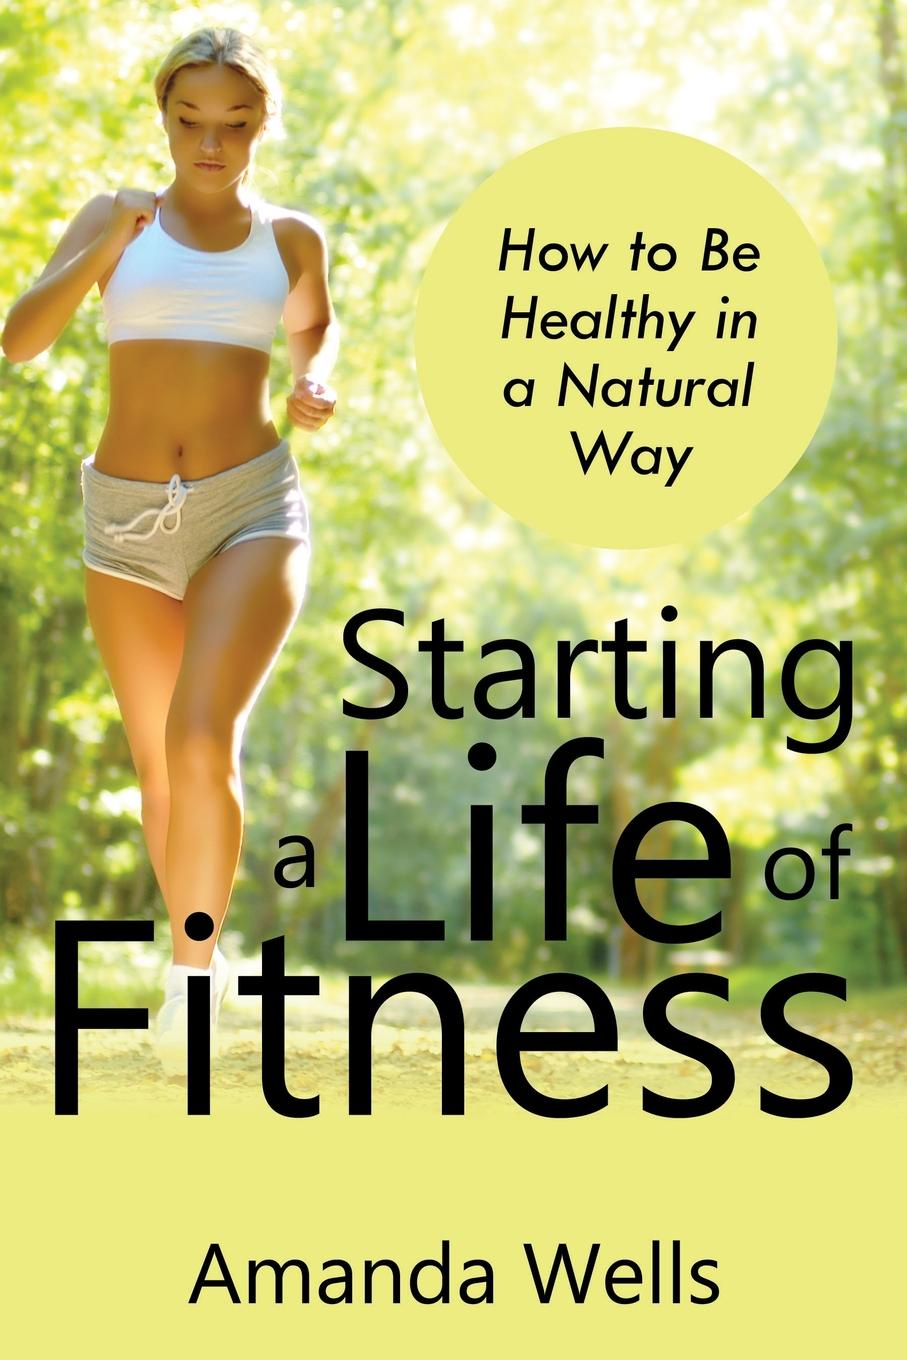 Starting a Life of Fitness. How to Be Healthy in a Natural Way